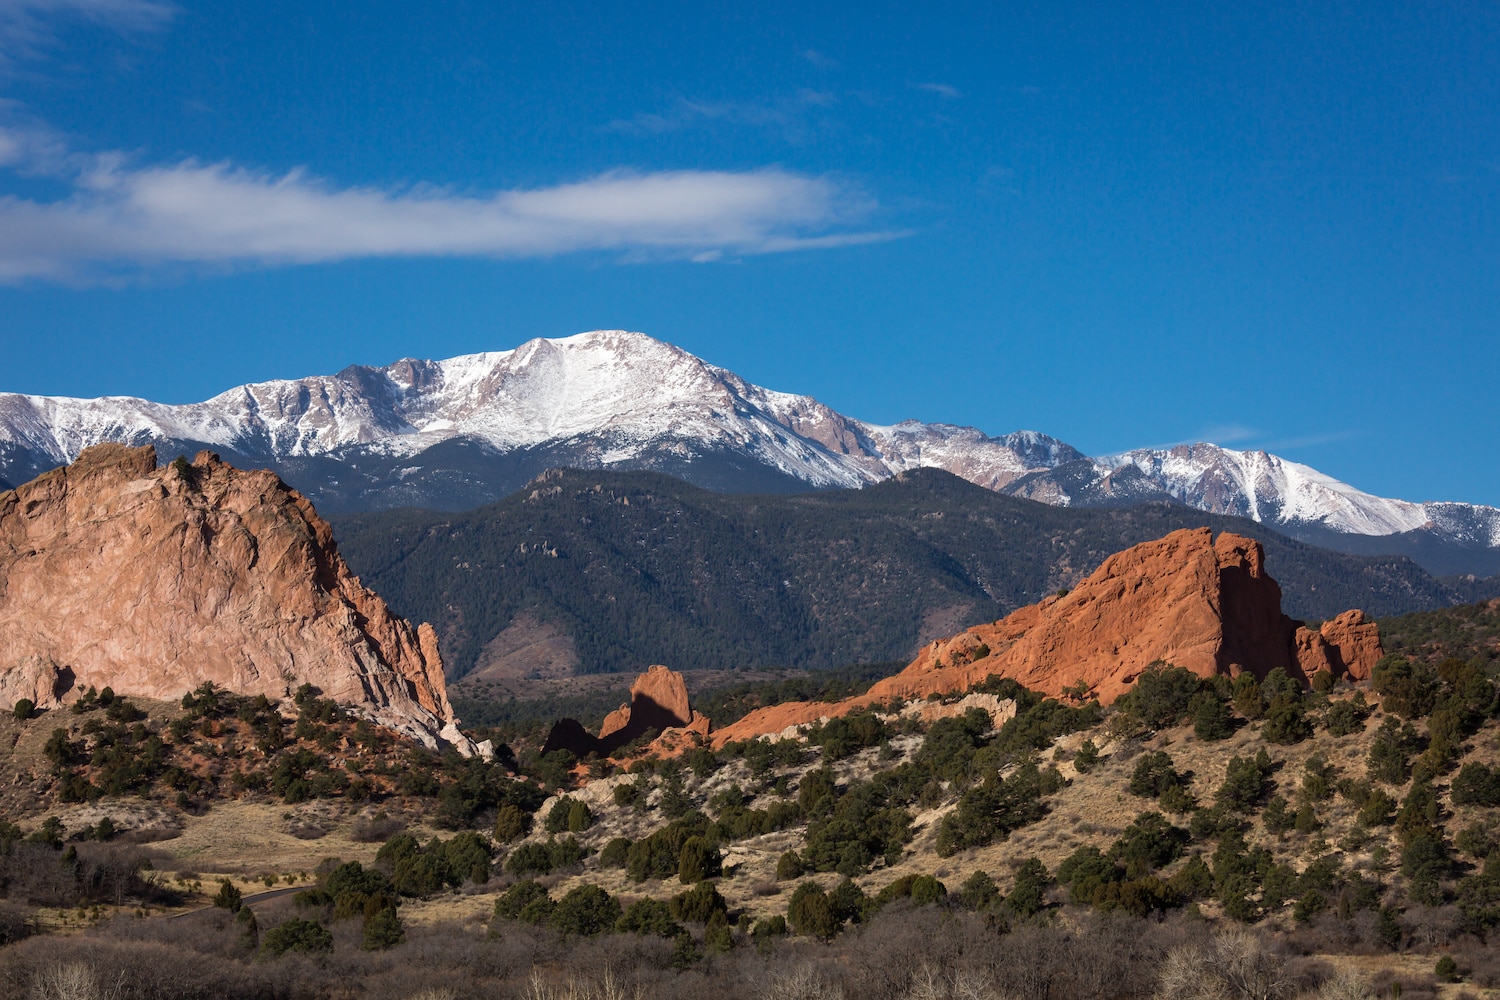 parks in colorado springs faraway view of pikes peak with red rocks in the front